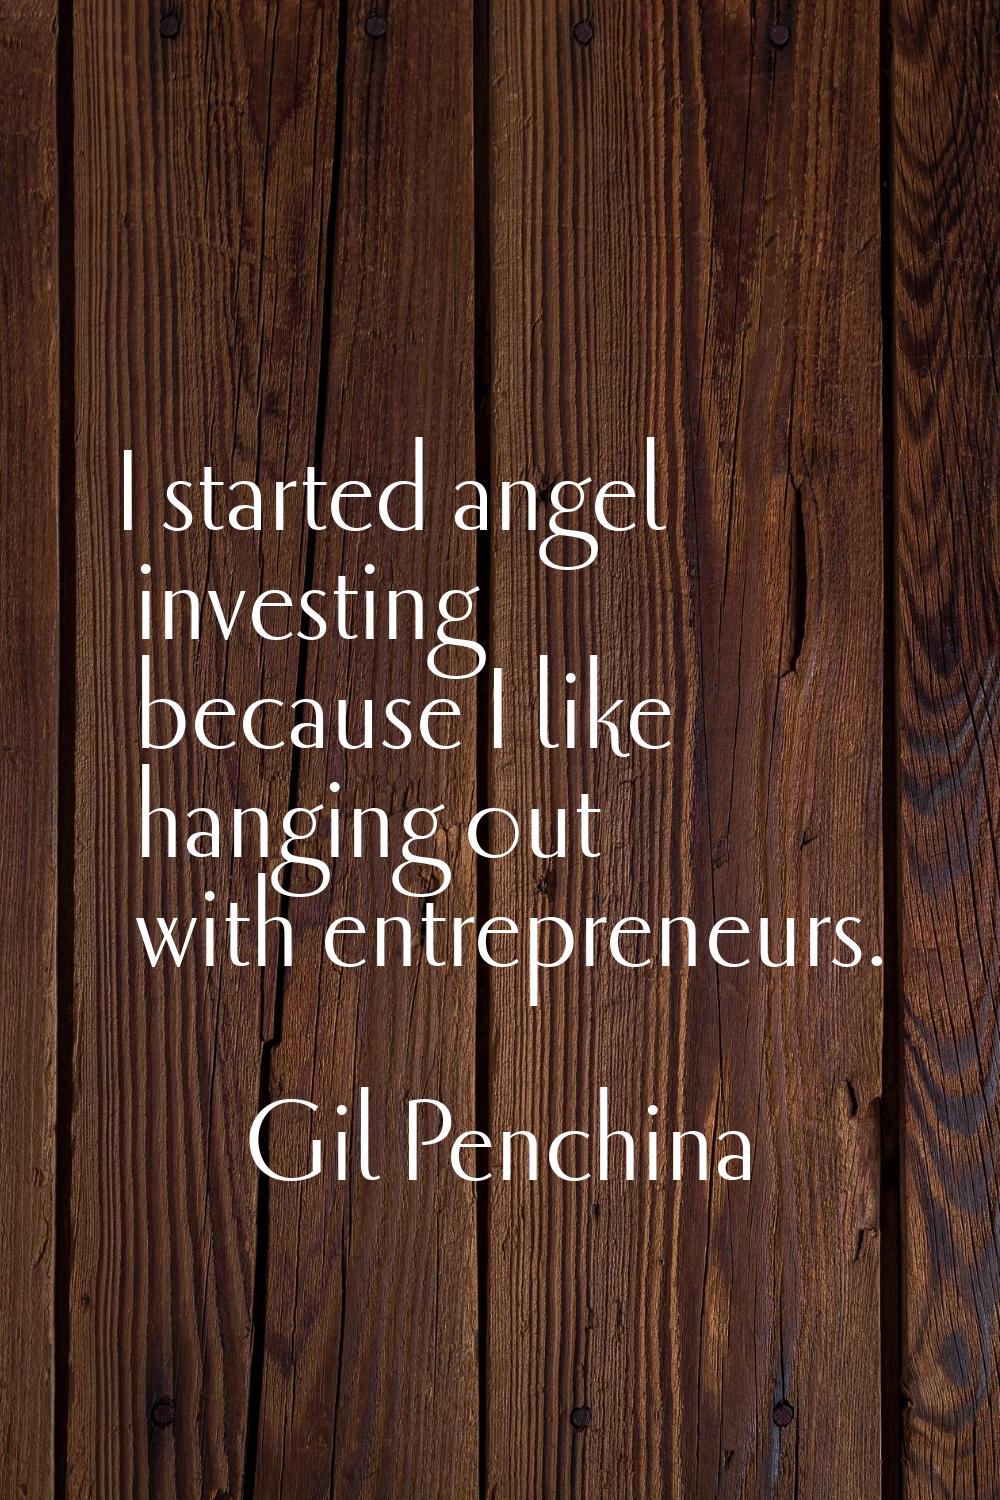 I started angel investing because I like hanging out with entrepreneurs.